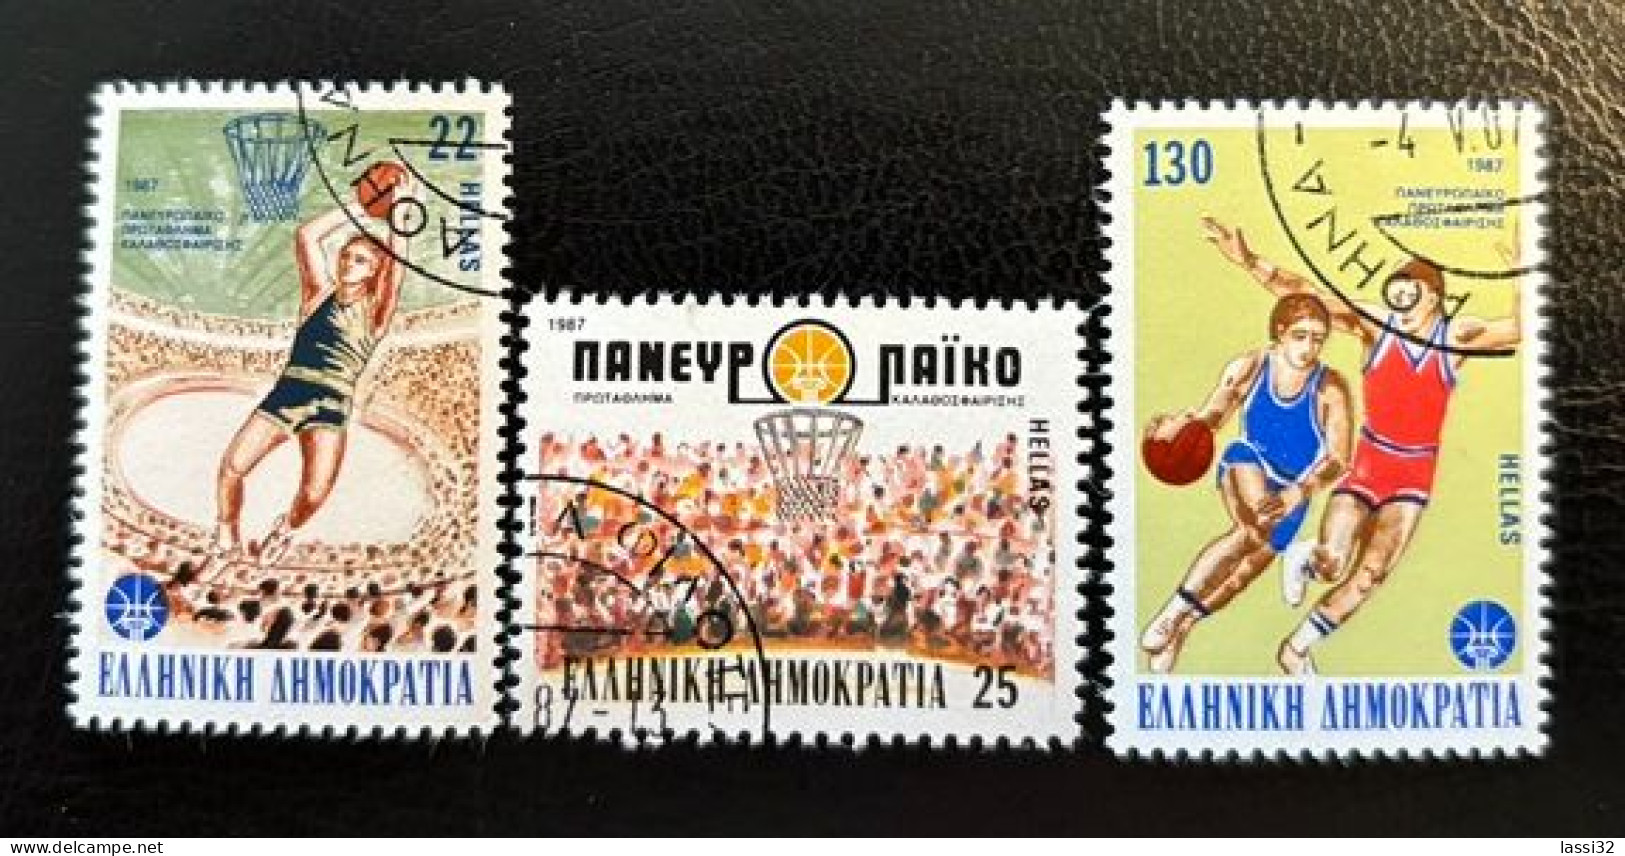 GREECE,1987, EUROPEAN BASKETBALL CHAMPIONSHIP, USED - Used Stamps